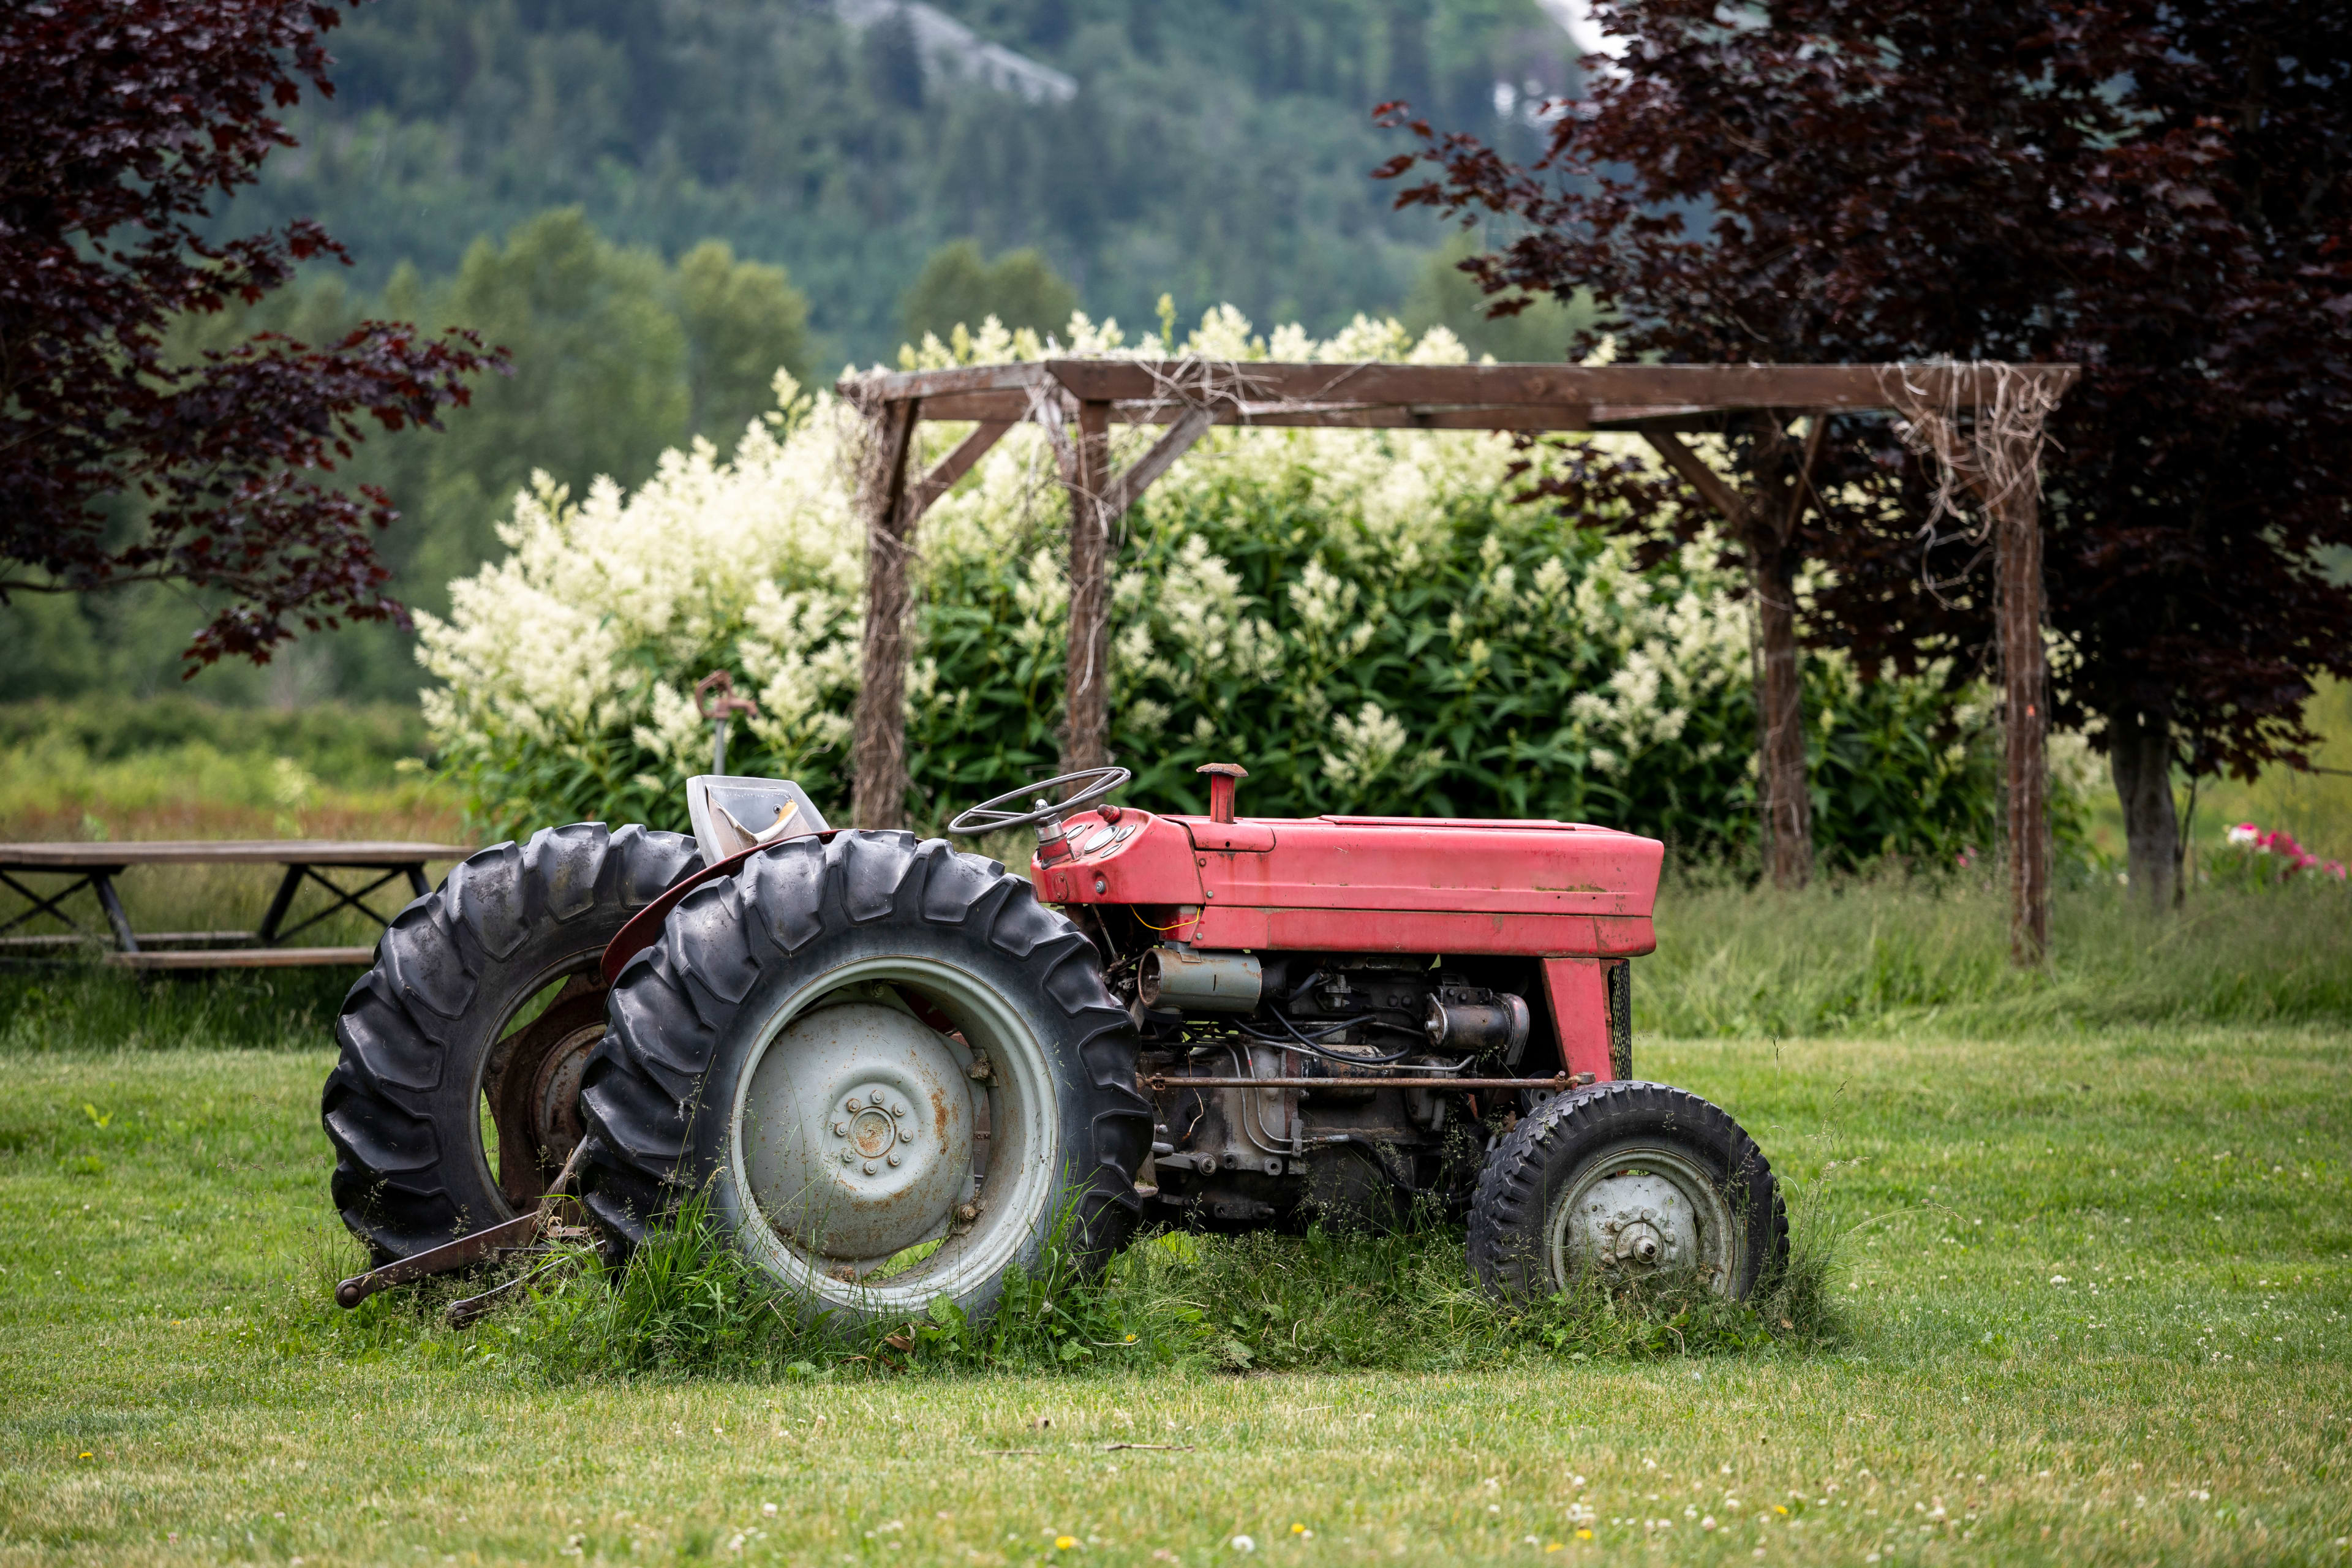 Red Tractor Parked on Grassy Lawn with Semi Pneumatic Tires